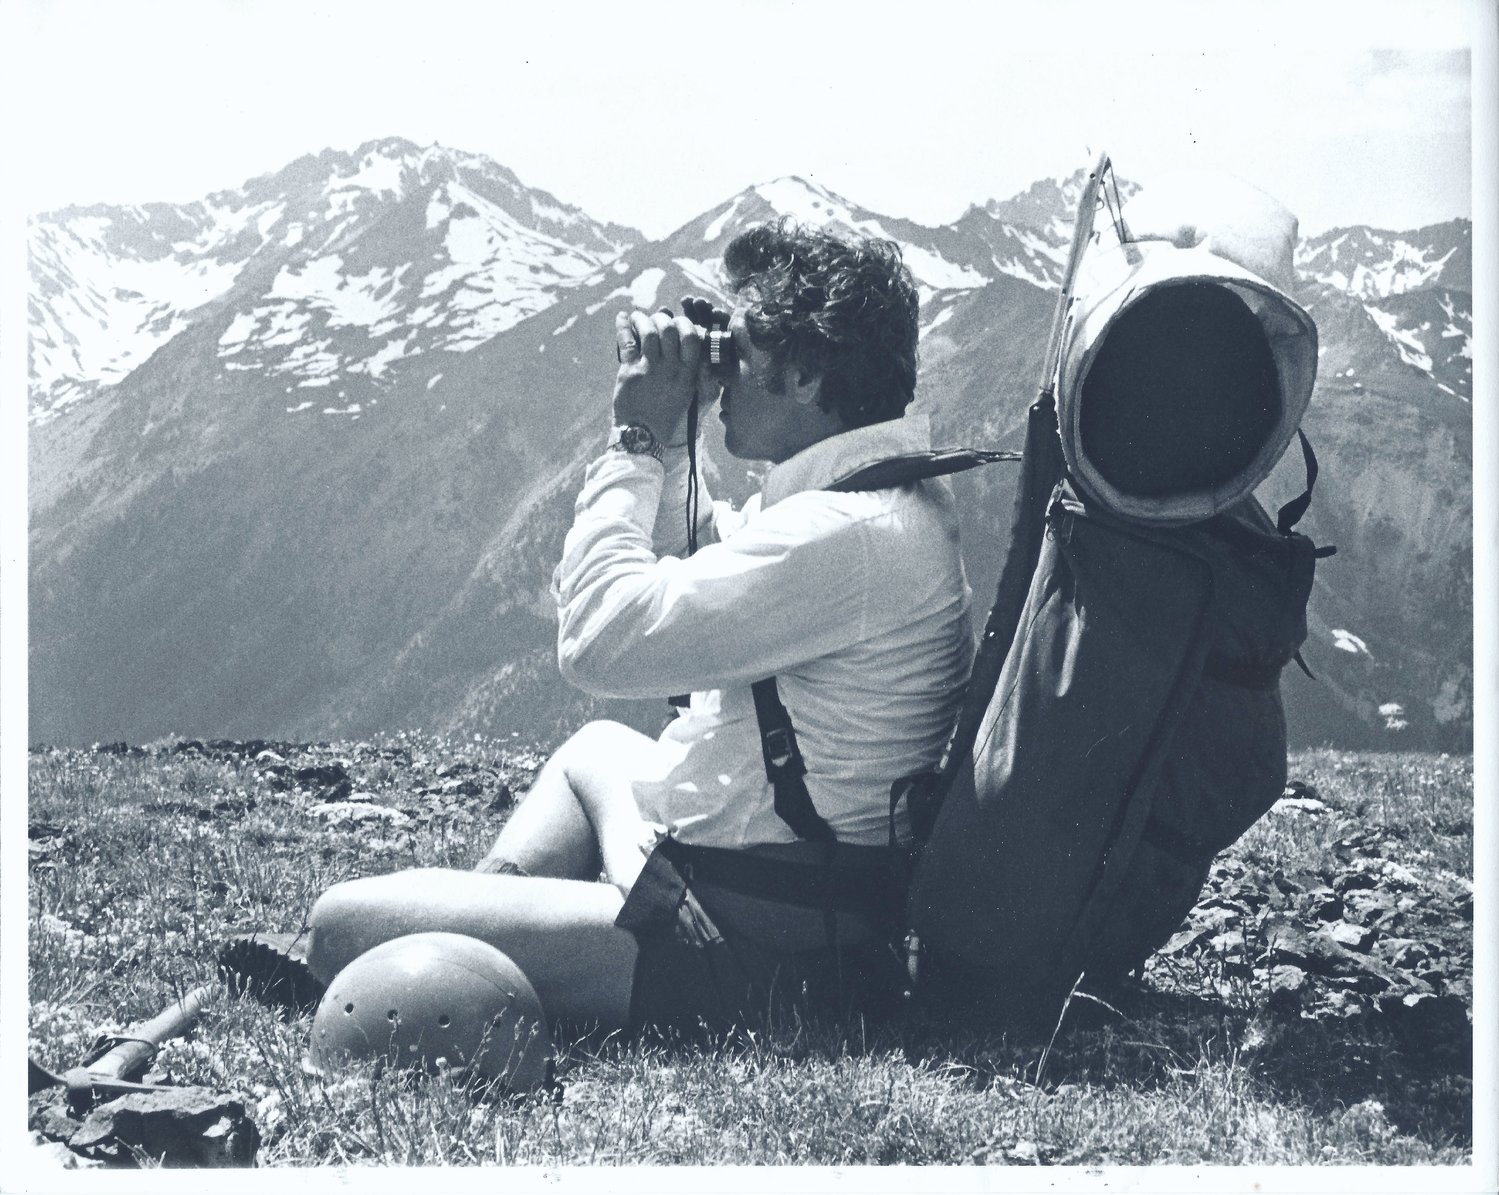 Richard Wojt takes in the mountain views on a backpacking trip in the 1980s.